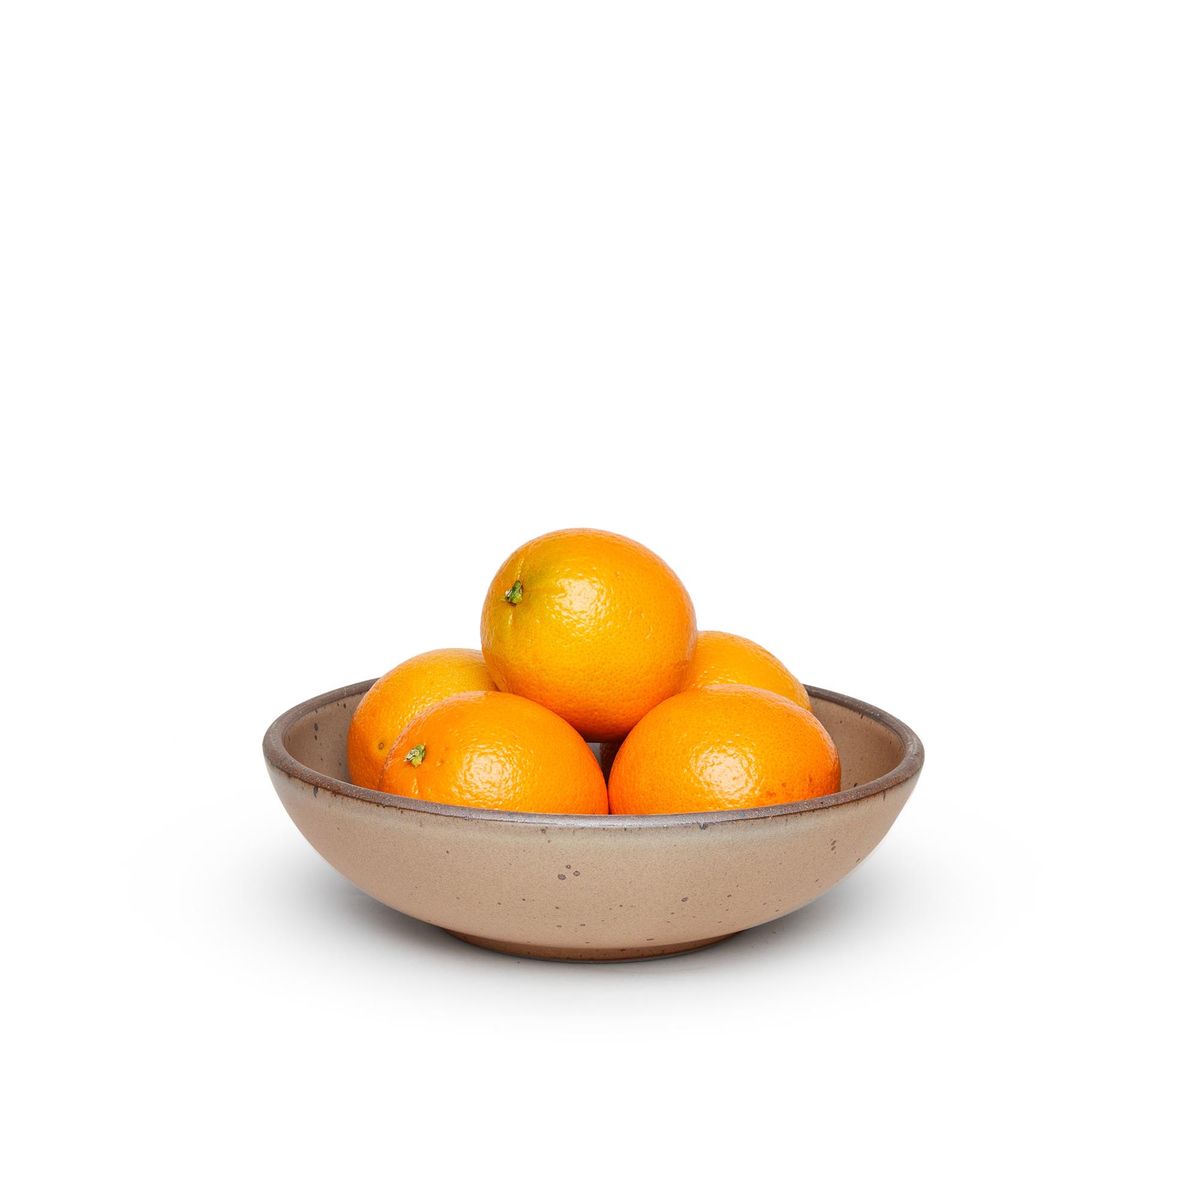 A dinner-sized shallow ceramic bowl in a warm pale brown color featuring iron speckles and an unglazed rim, filled with oranges